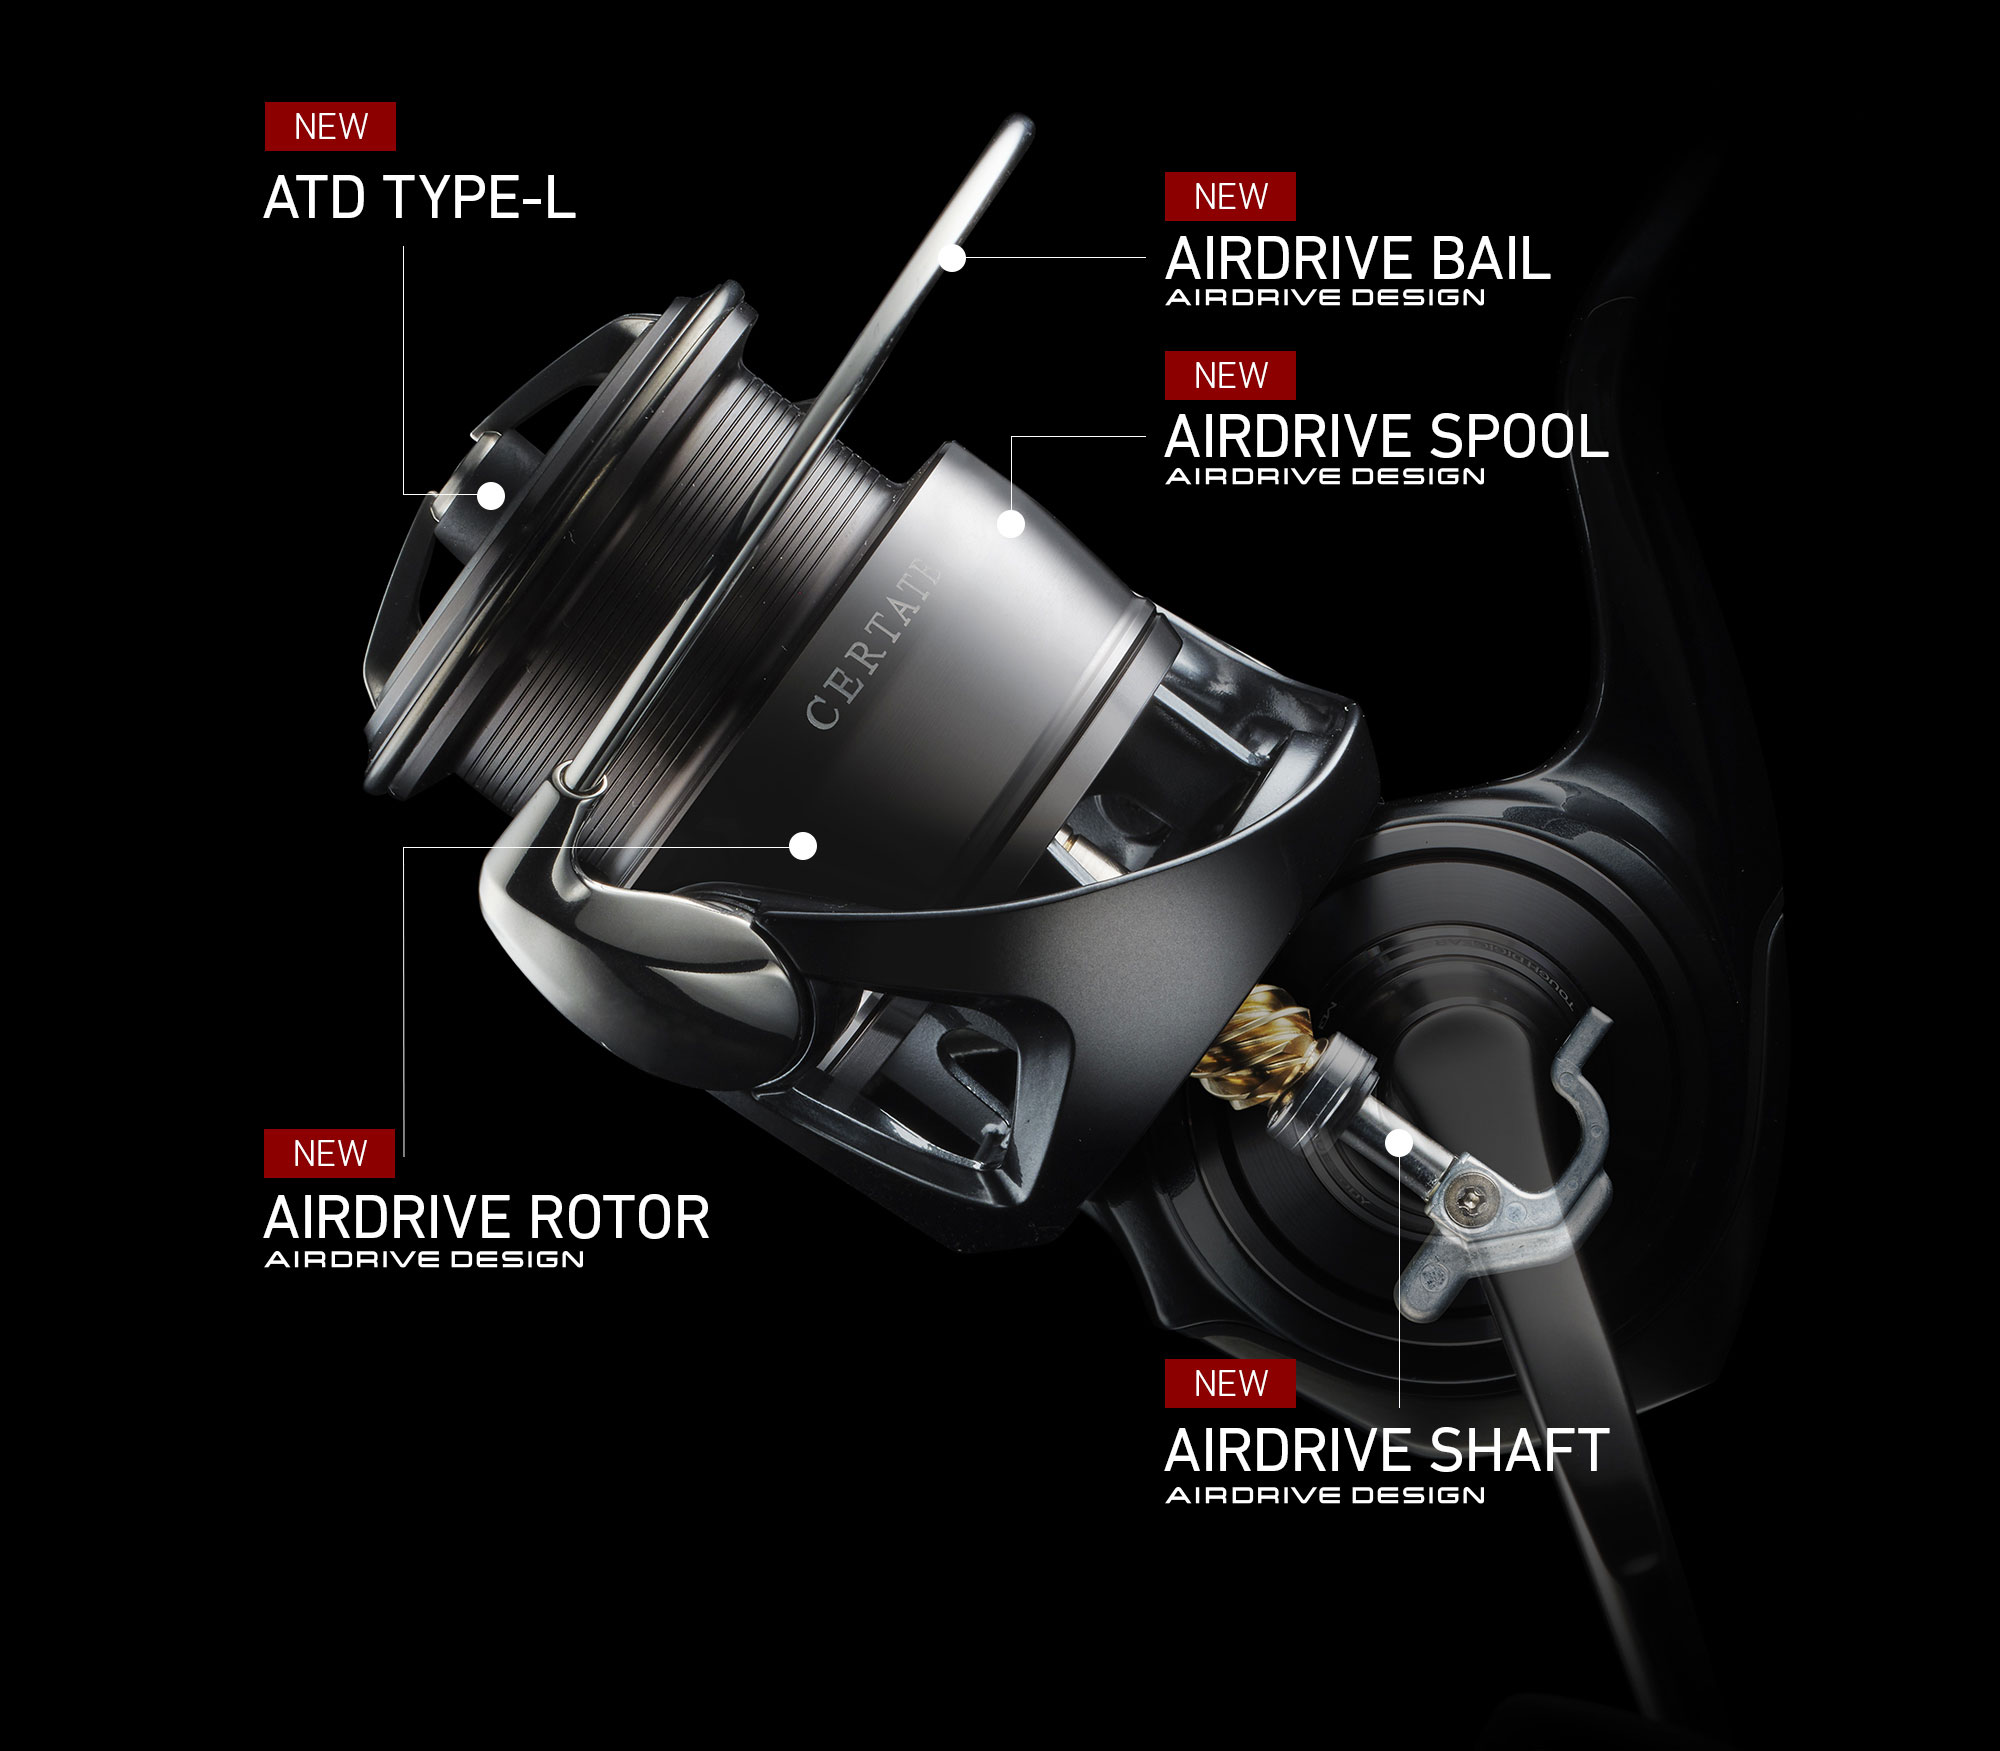 Here It Comes! Strong, Rigid and Tough DAIWA 24 CERTATE Is Renewed